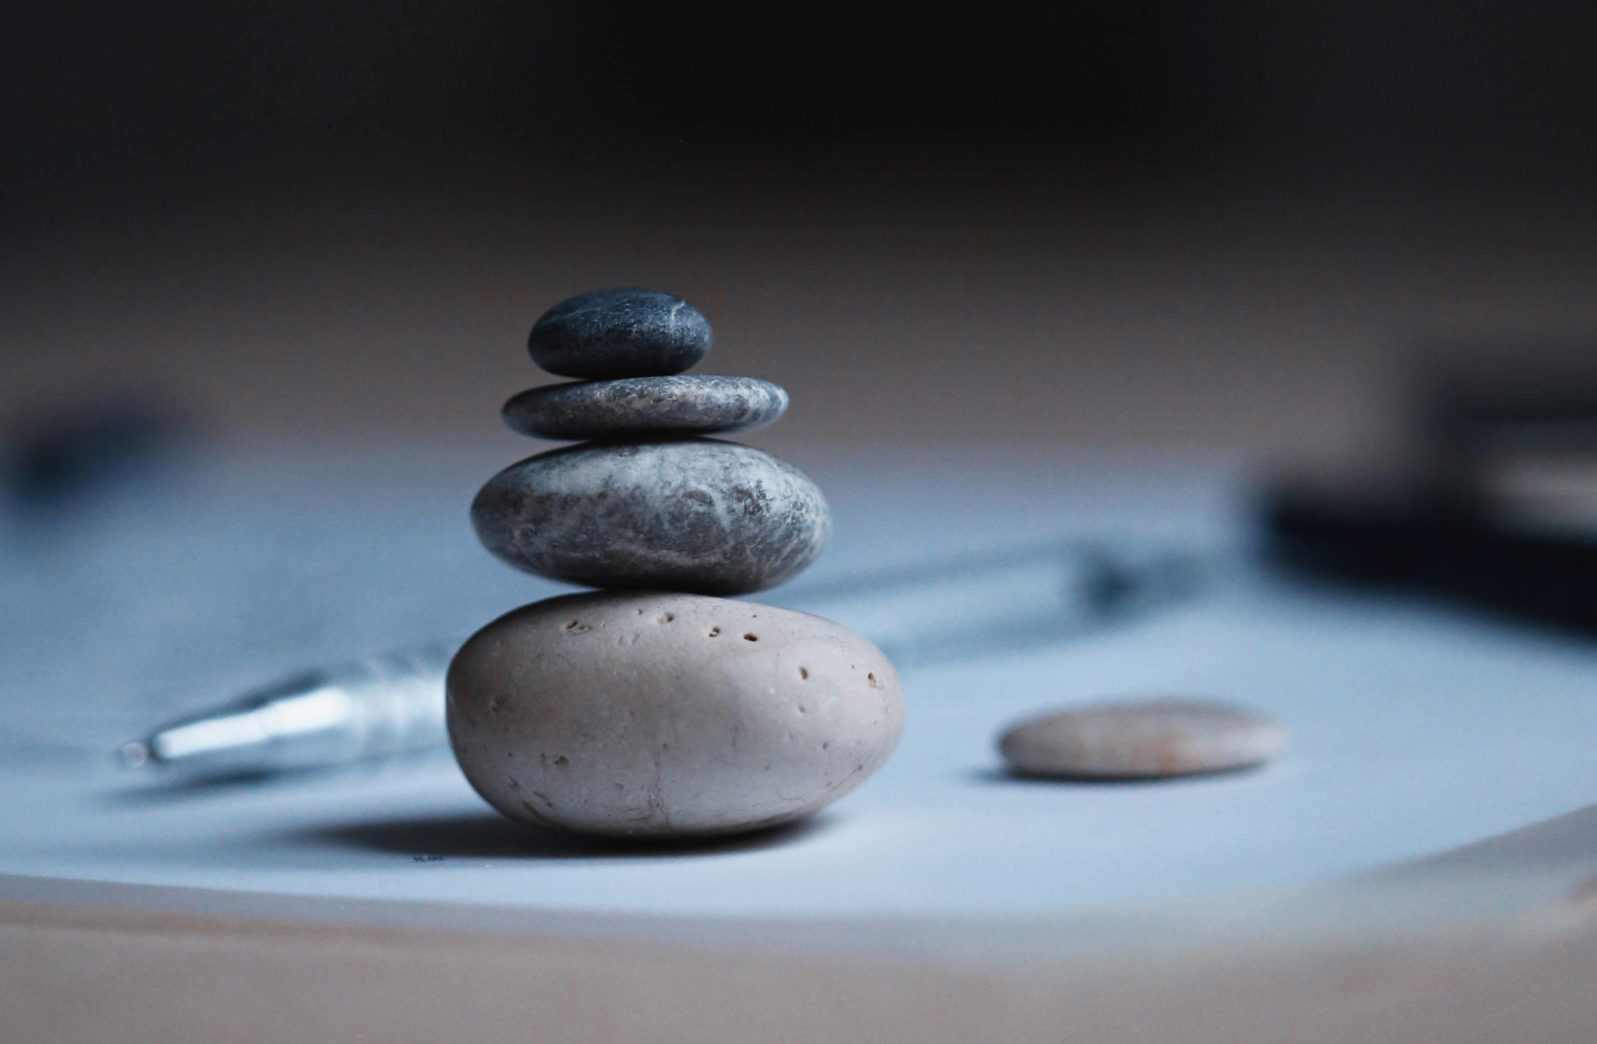 Stones balanced on table with a pen